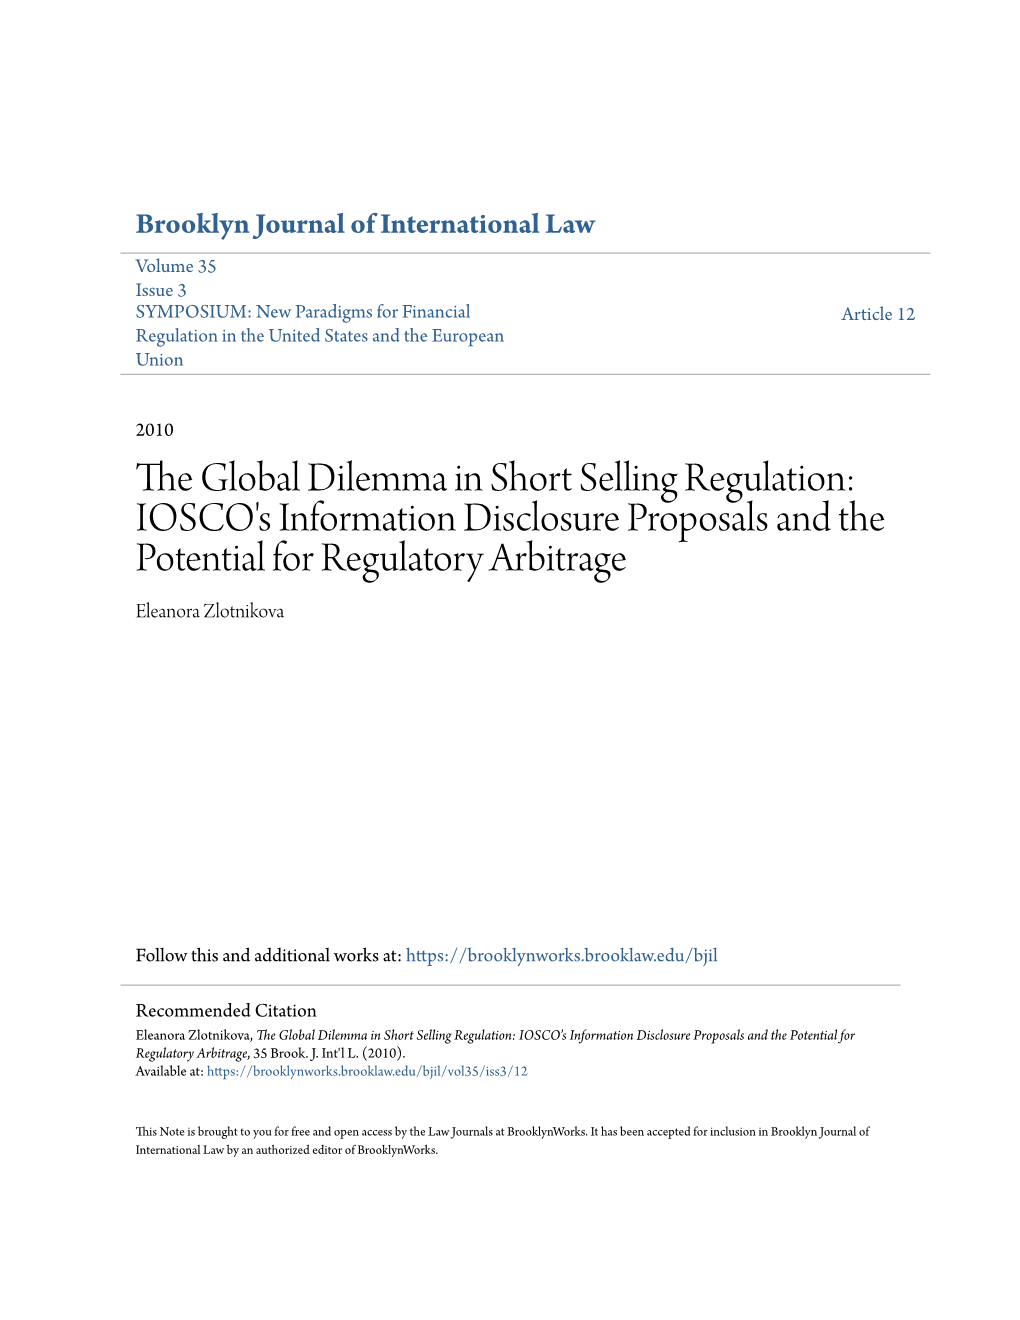 The Global Dilemma in Short Selling Regulation: IOSCO's Information Disclosure Proposals and the Potential for Regulatory Arbitrage Eleanora Zlotnikova